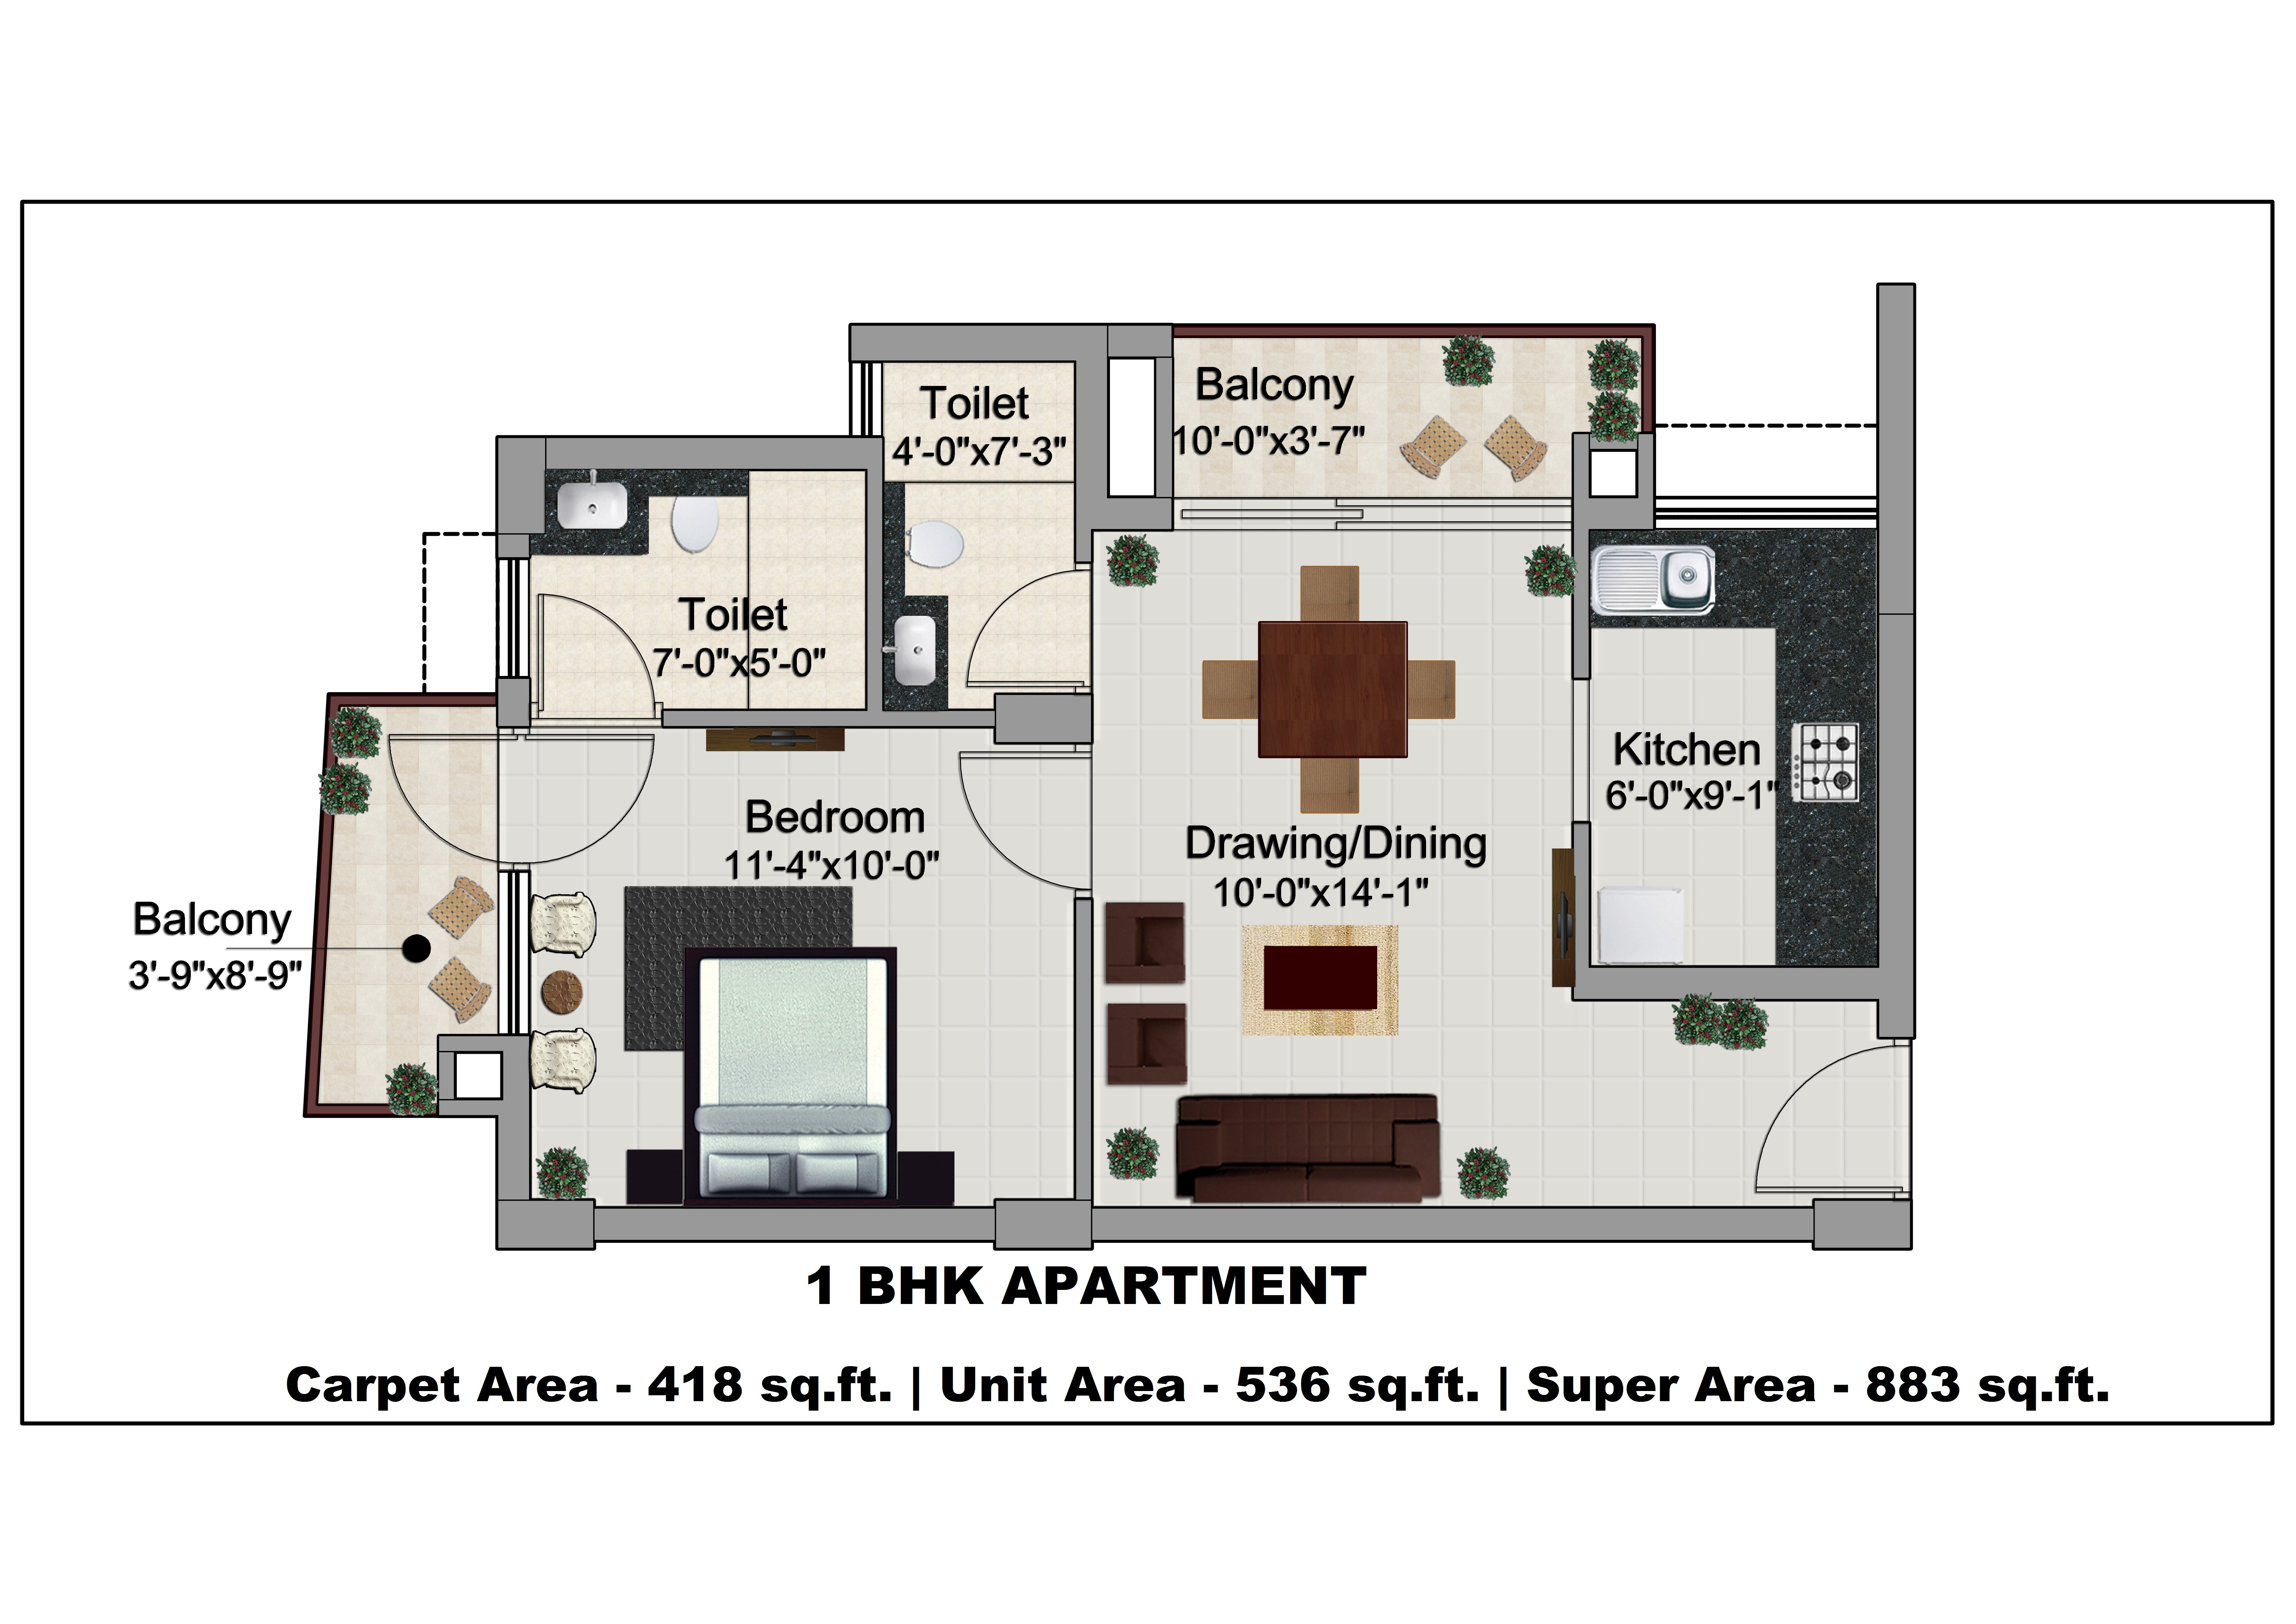 Floor Plans Of Green Lotus Saksham Apartments And Penthouses